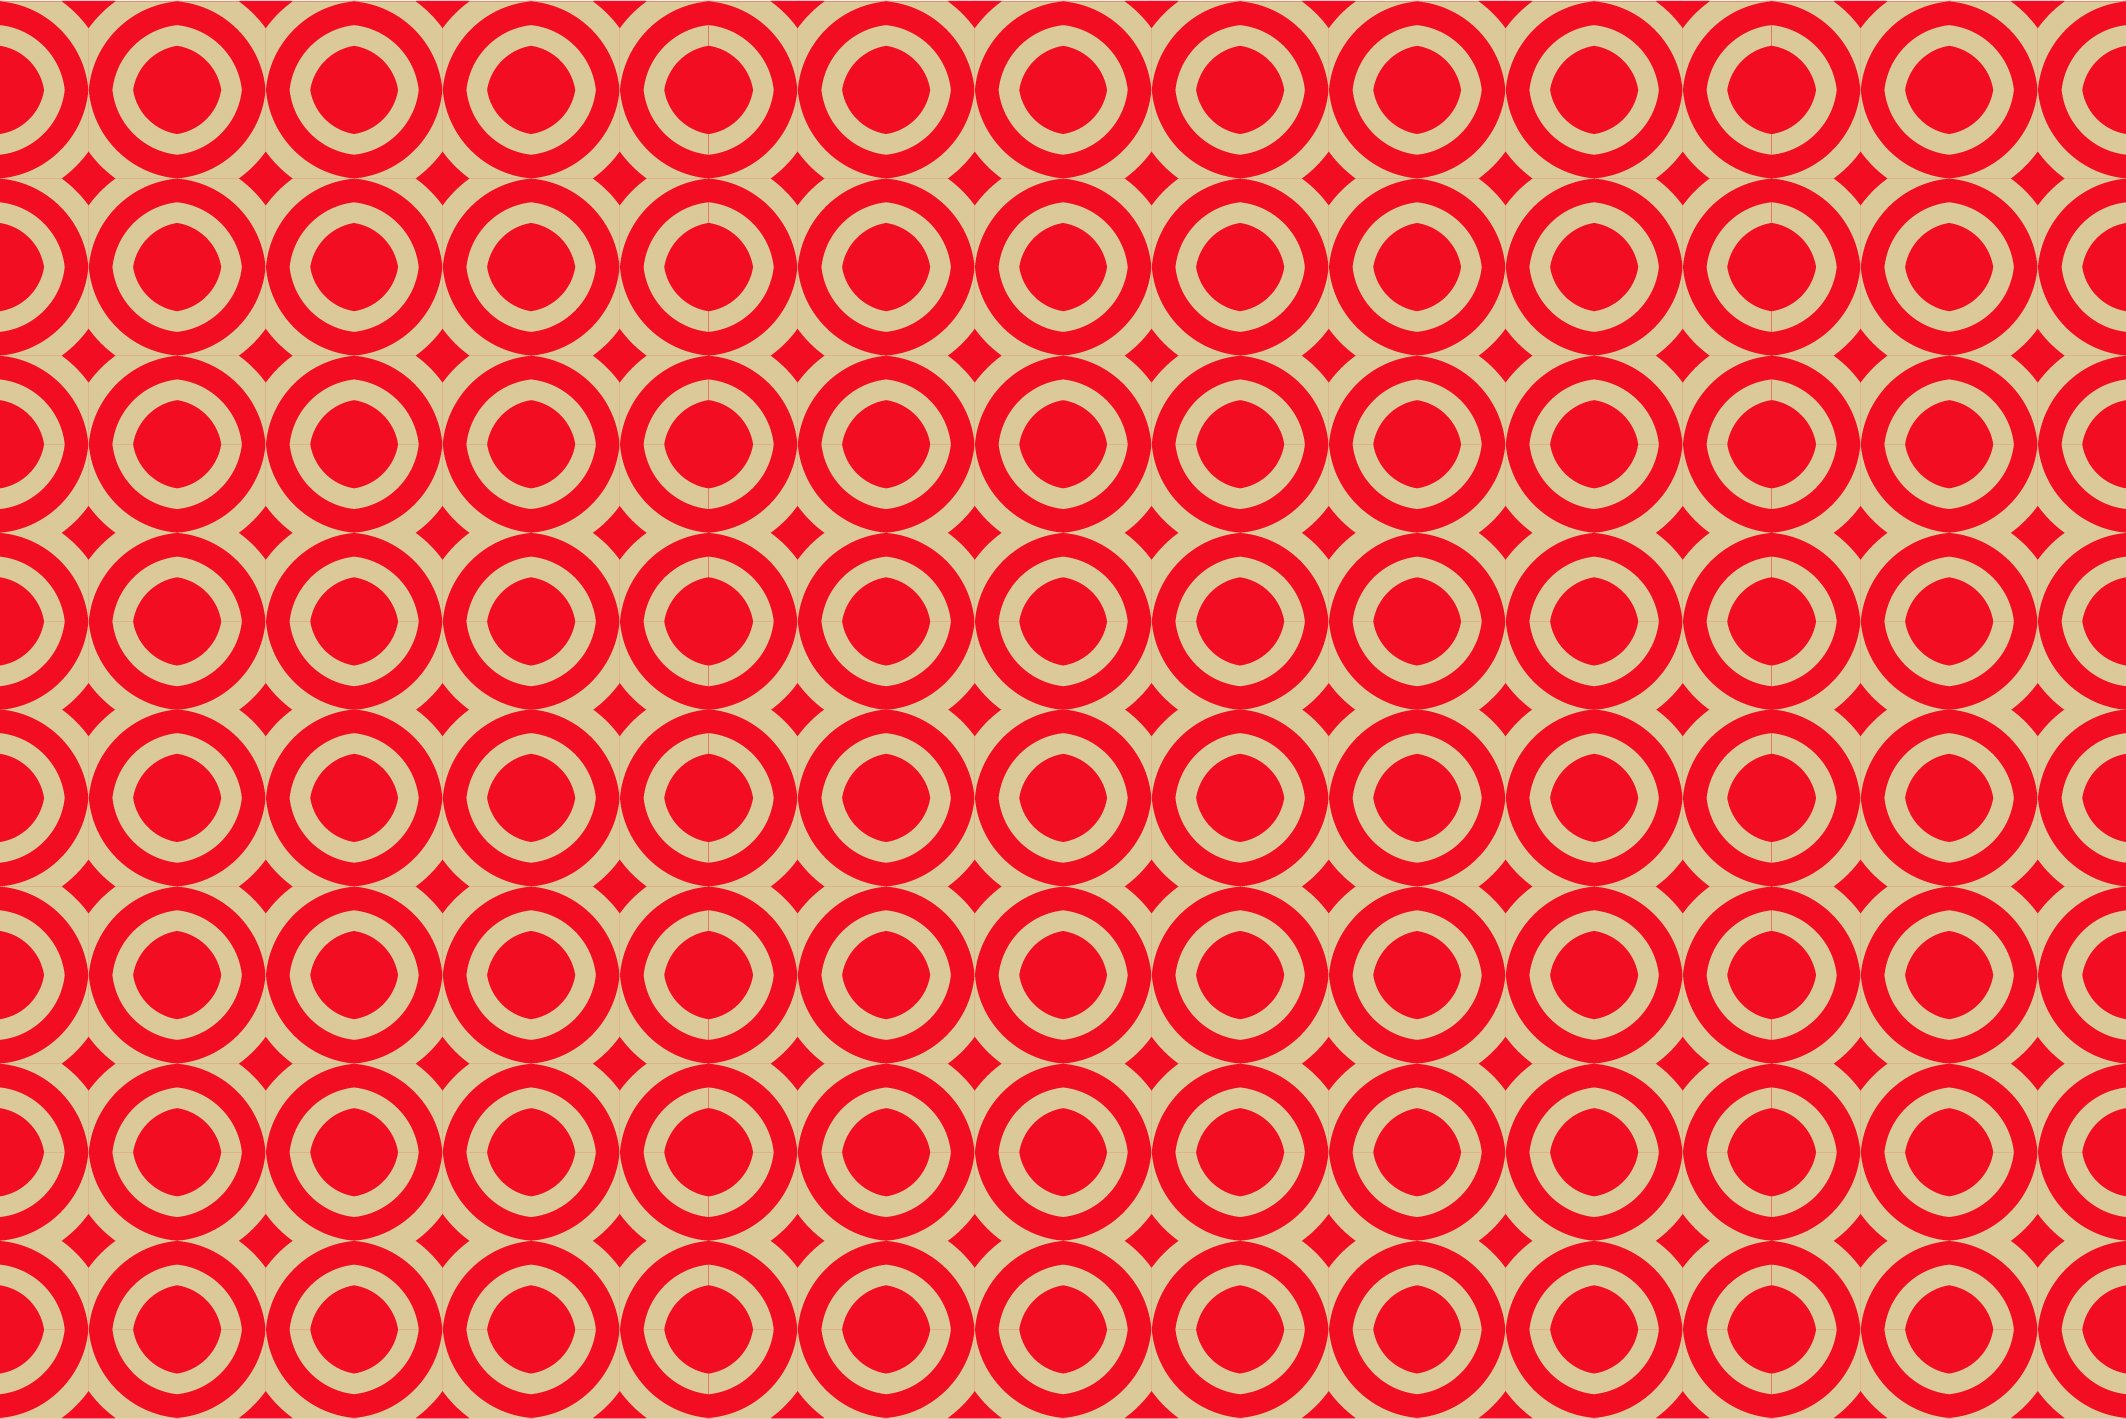 Red background with the gold circles.